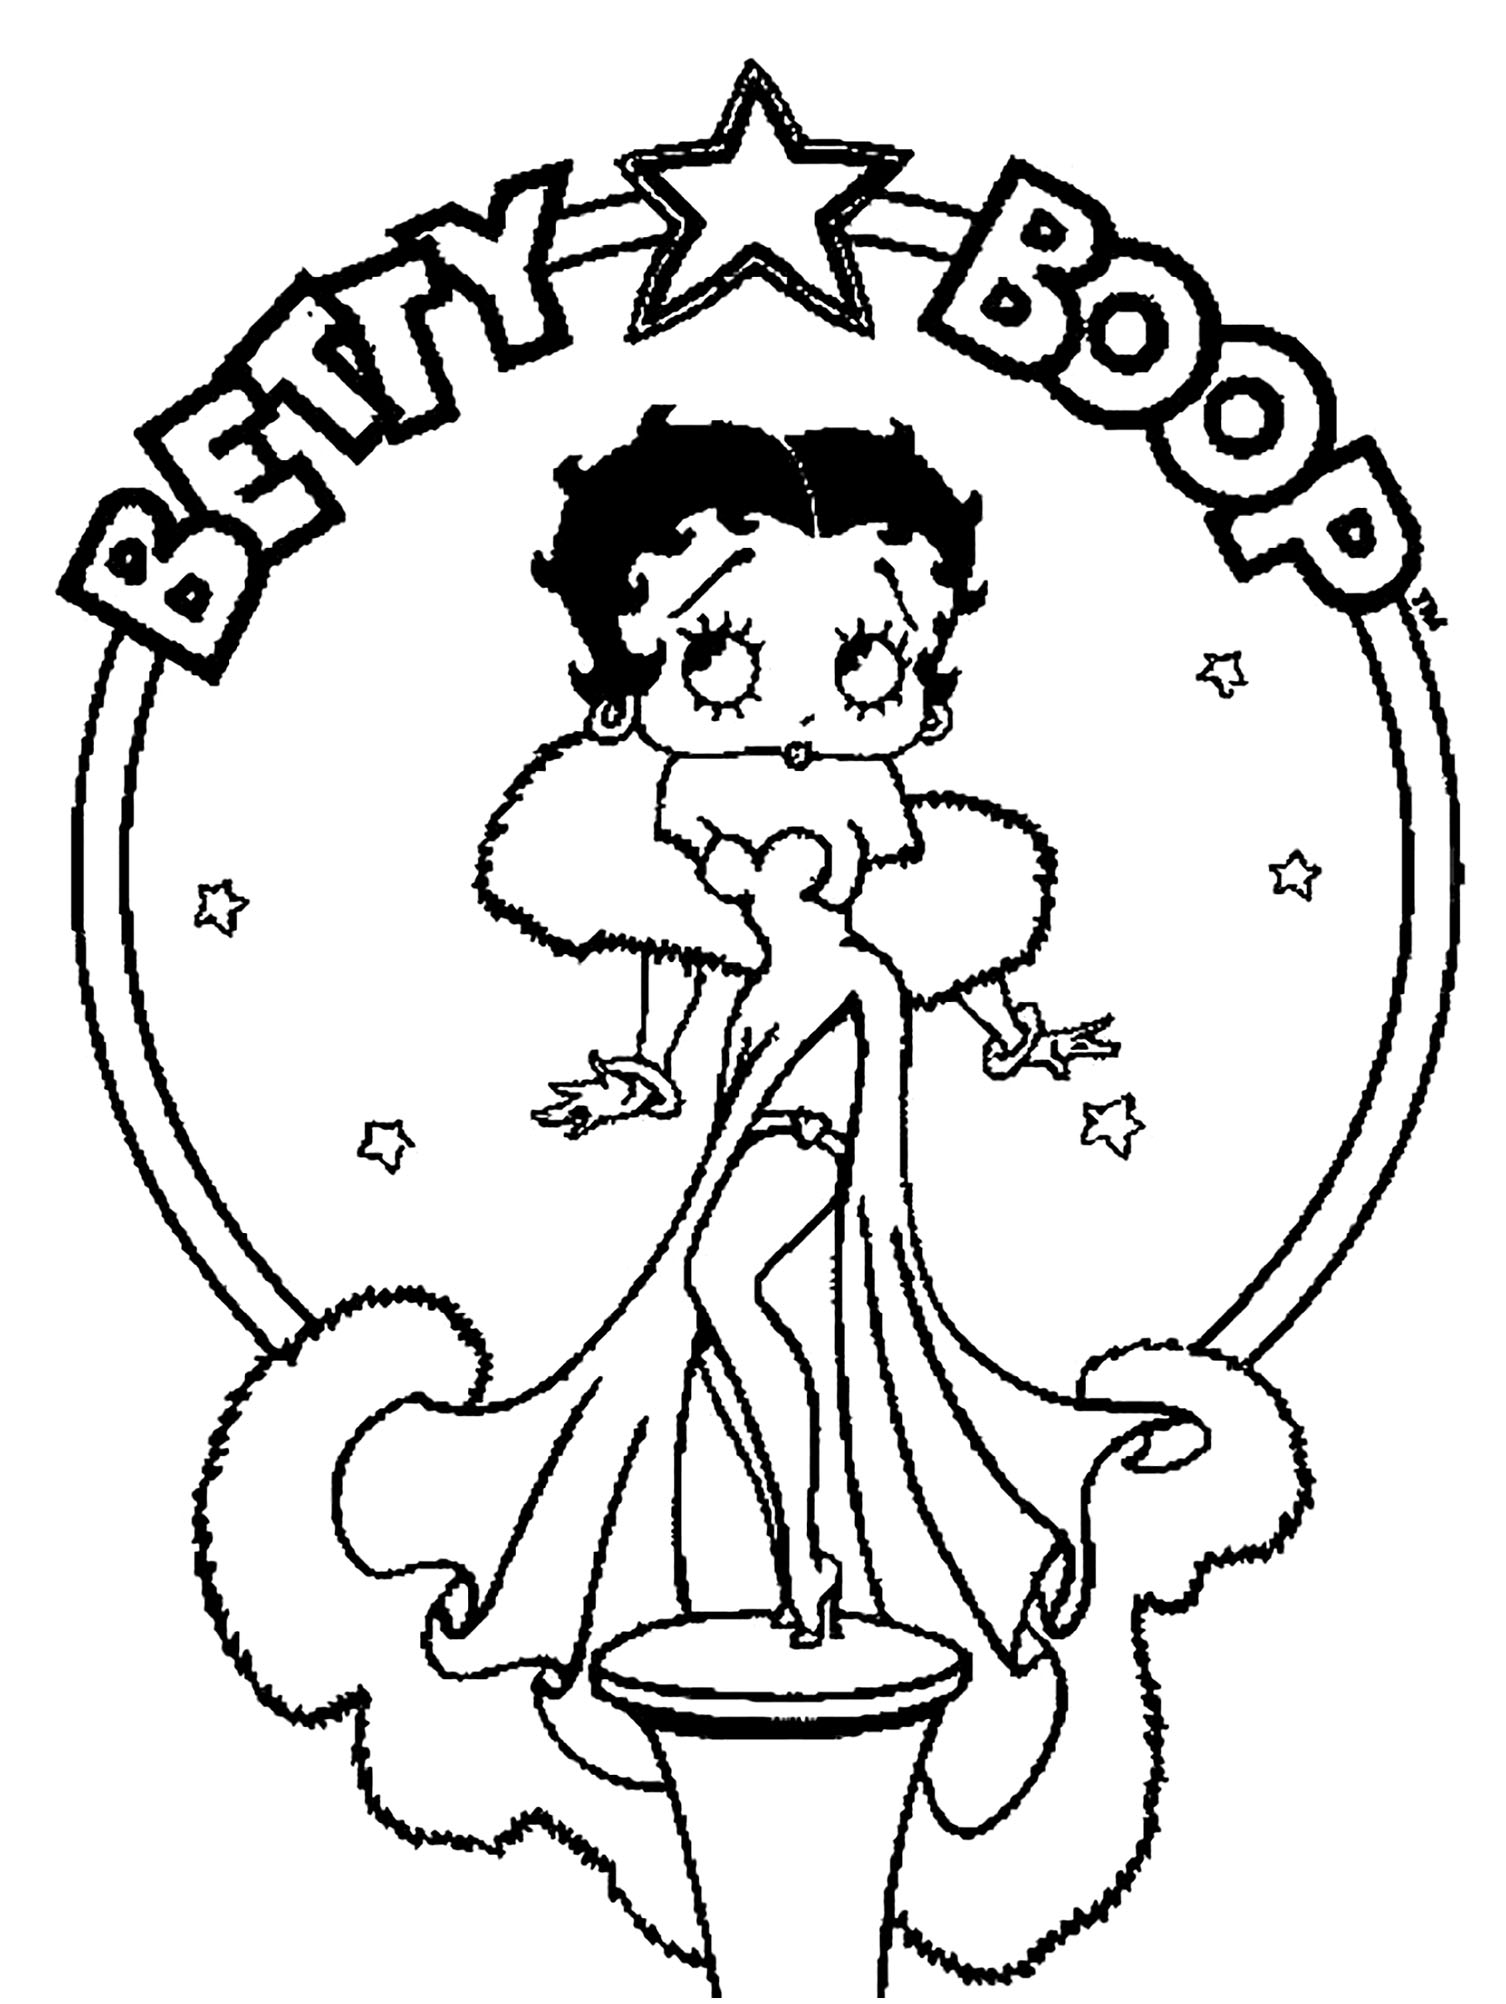 Betty Boop Picture To Print And Color Betty Boop Kids Coloring Pages - Free Printable Betty Boop